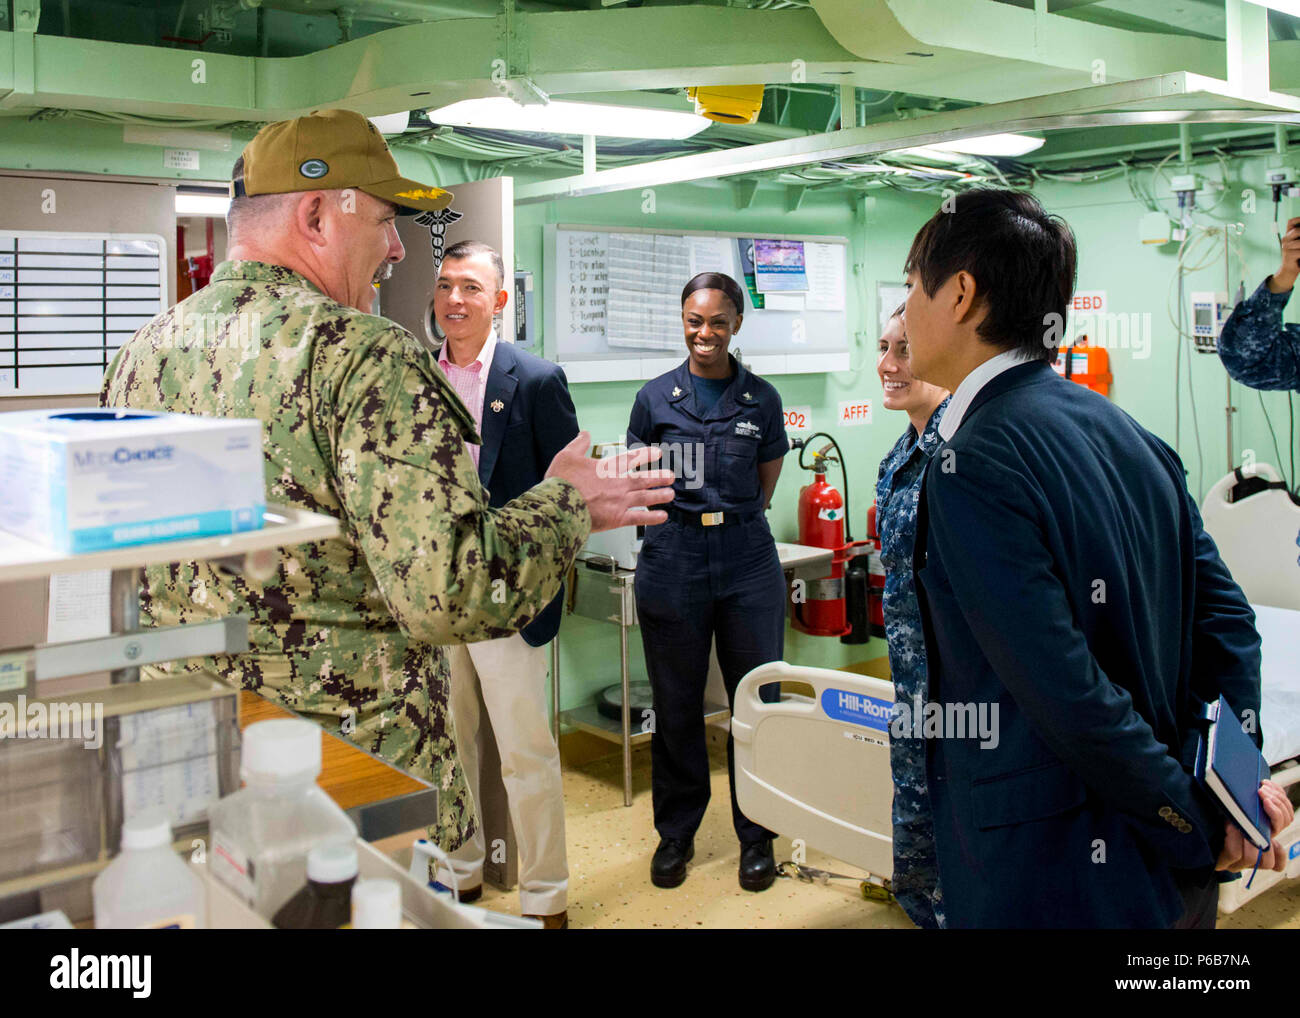 180621-N-SD711-0075 SASEBO, Japan (June 21, 2018) Capt. Michael Harris, executive officer of the San Antonio-class amphibious transport dock ship USS Green Bay (LPD 20), gives a tour of the medical bay to Takahiro Suzuki, Ministry of Foreign Affairs Status of Forces Agreement deputy director, North American Affairs Bureau, aboard Green Bay, June 21, 2018. The tour of CFAS and the ship was given to increase his understanding of CFAS’ capabilities in support of the U.S.-Japan alliance. (U.S. Navy photo by Mass Communication Specialist 3rd Class Geoffrey P. Barham/Released) Stock Photo